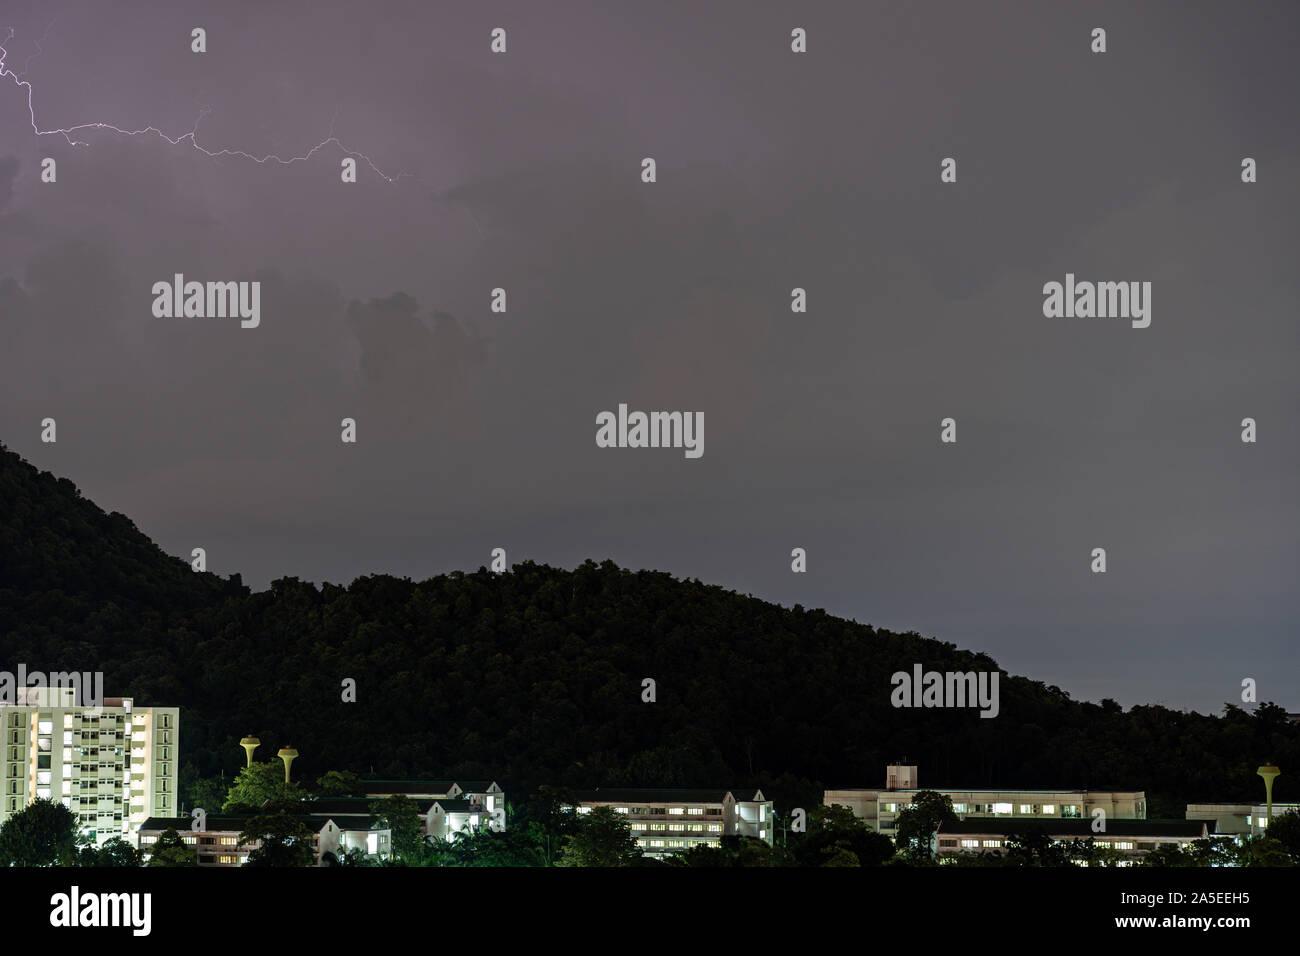 The Storm lightning strikes in mountains during a thunderstorm at night. Beautiful dramatic view Stock Photo